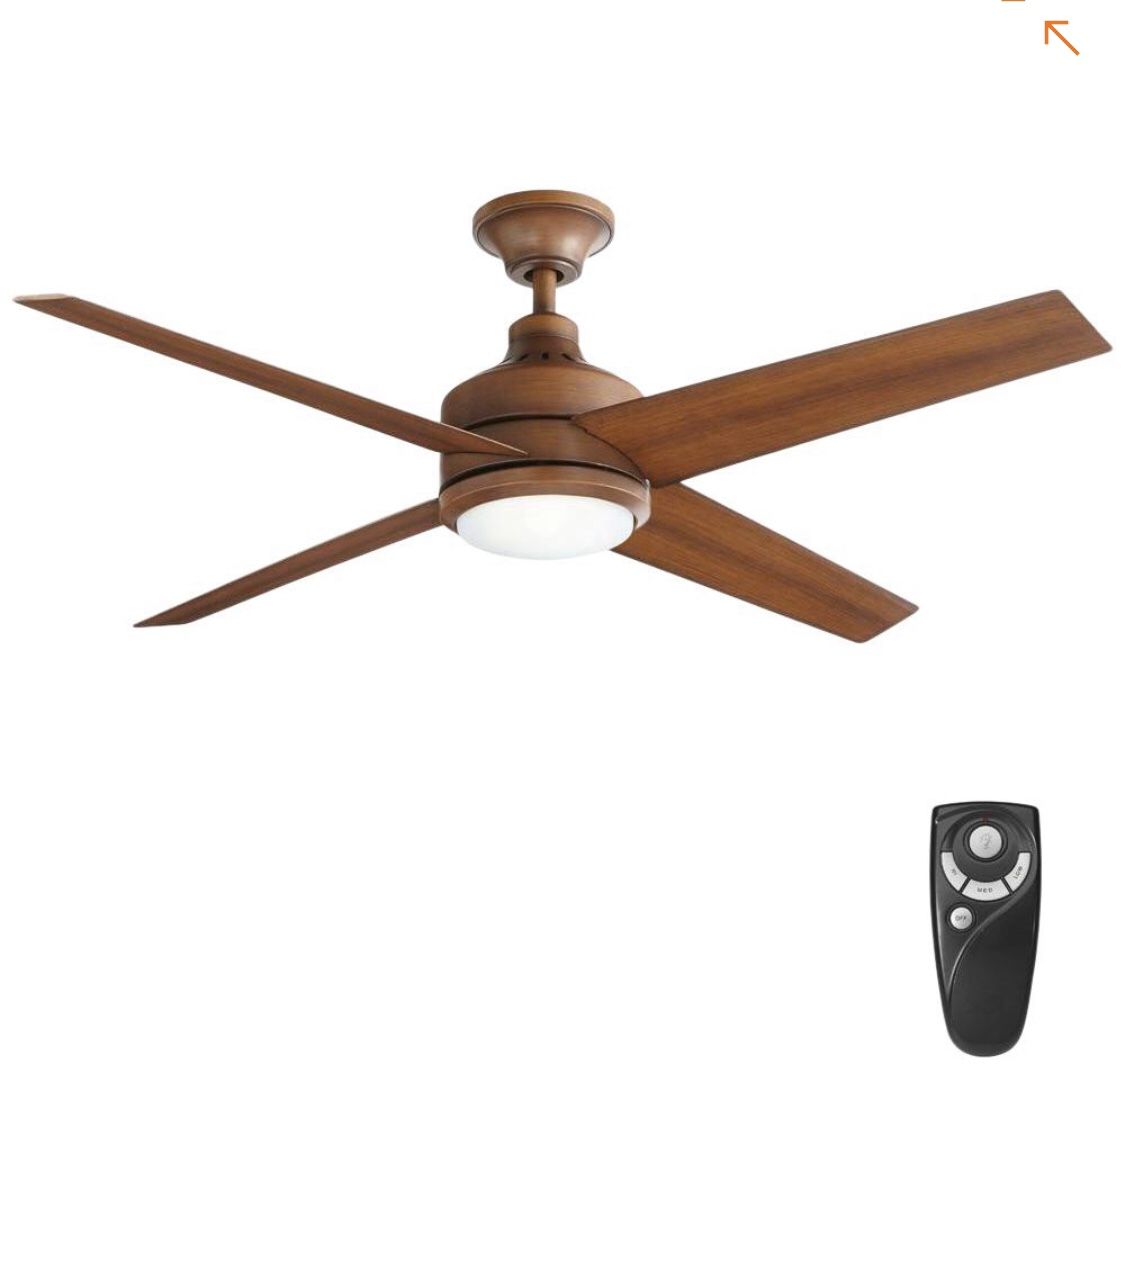 Home Decorators Collection Mercer 52 in. LED Indoor Distressed Koa Ceiling Fan with Light Kit and Remote Control